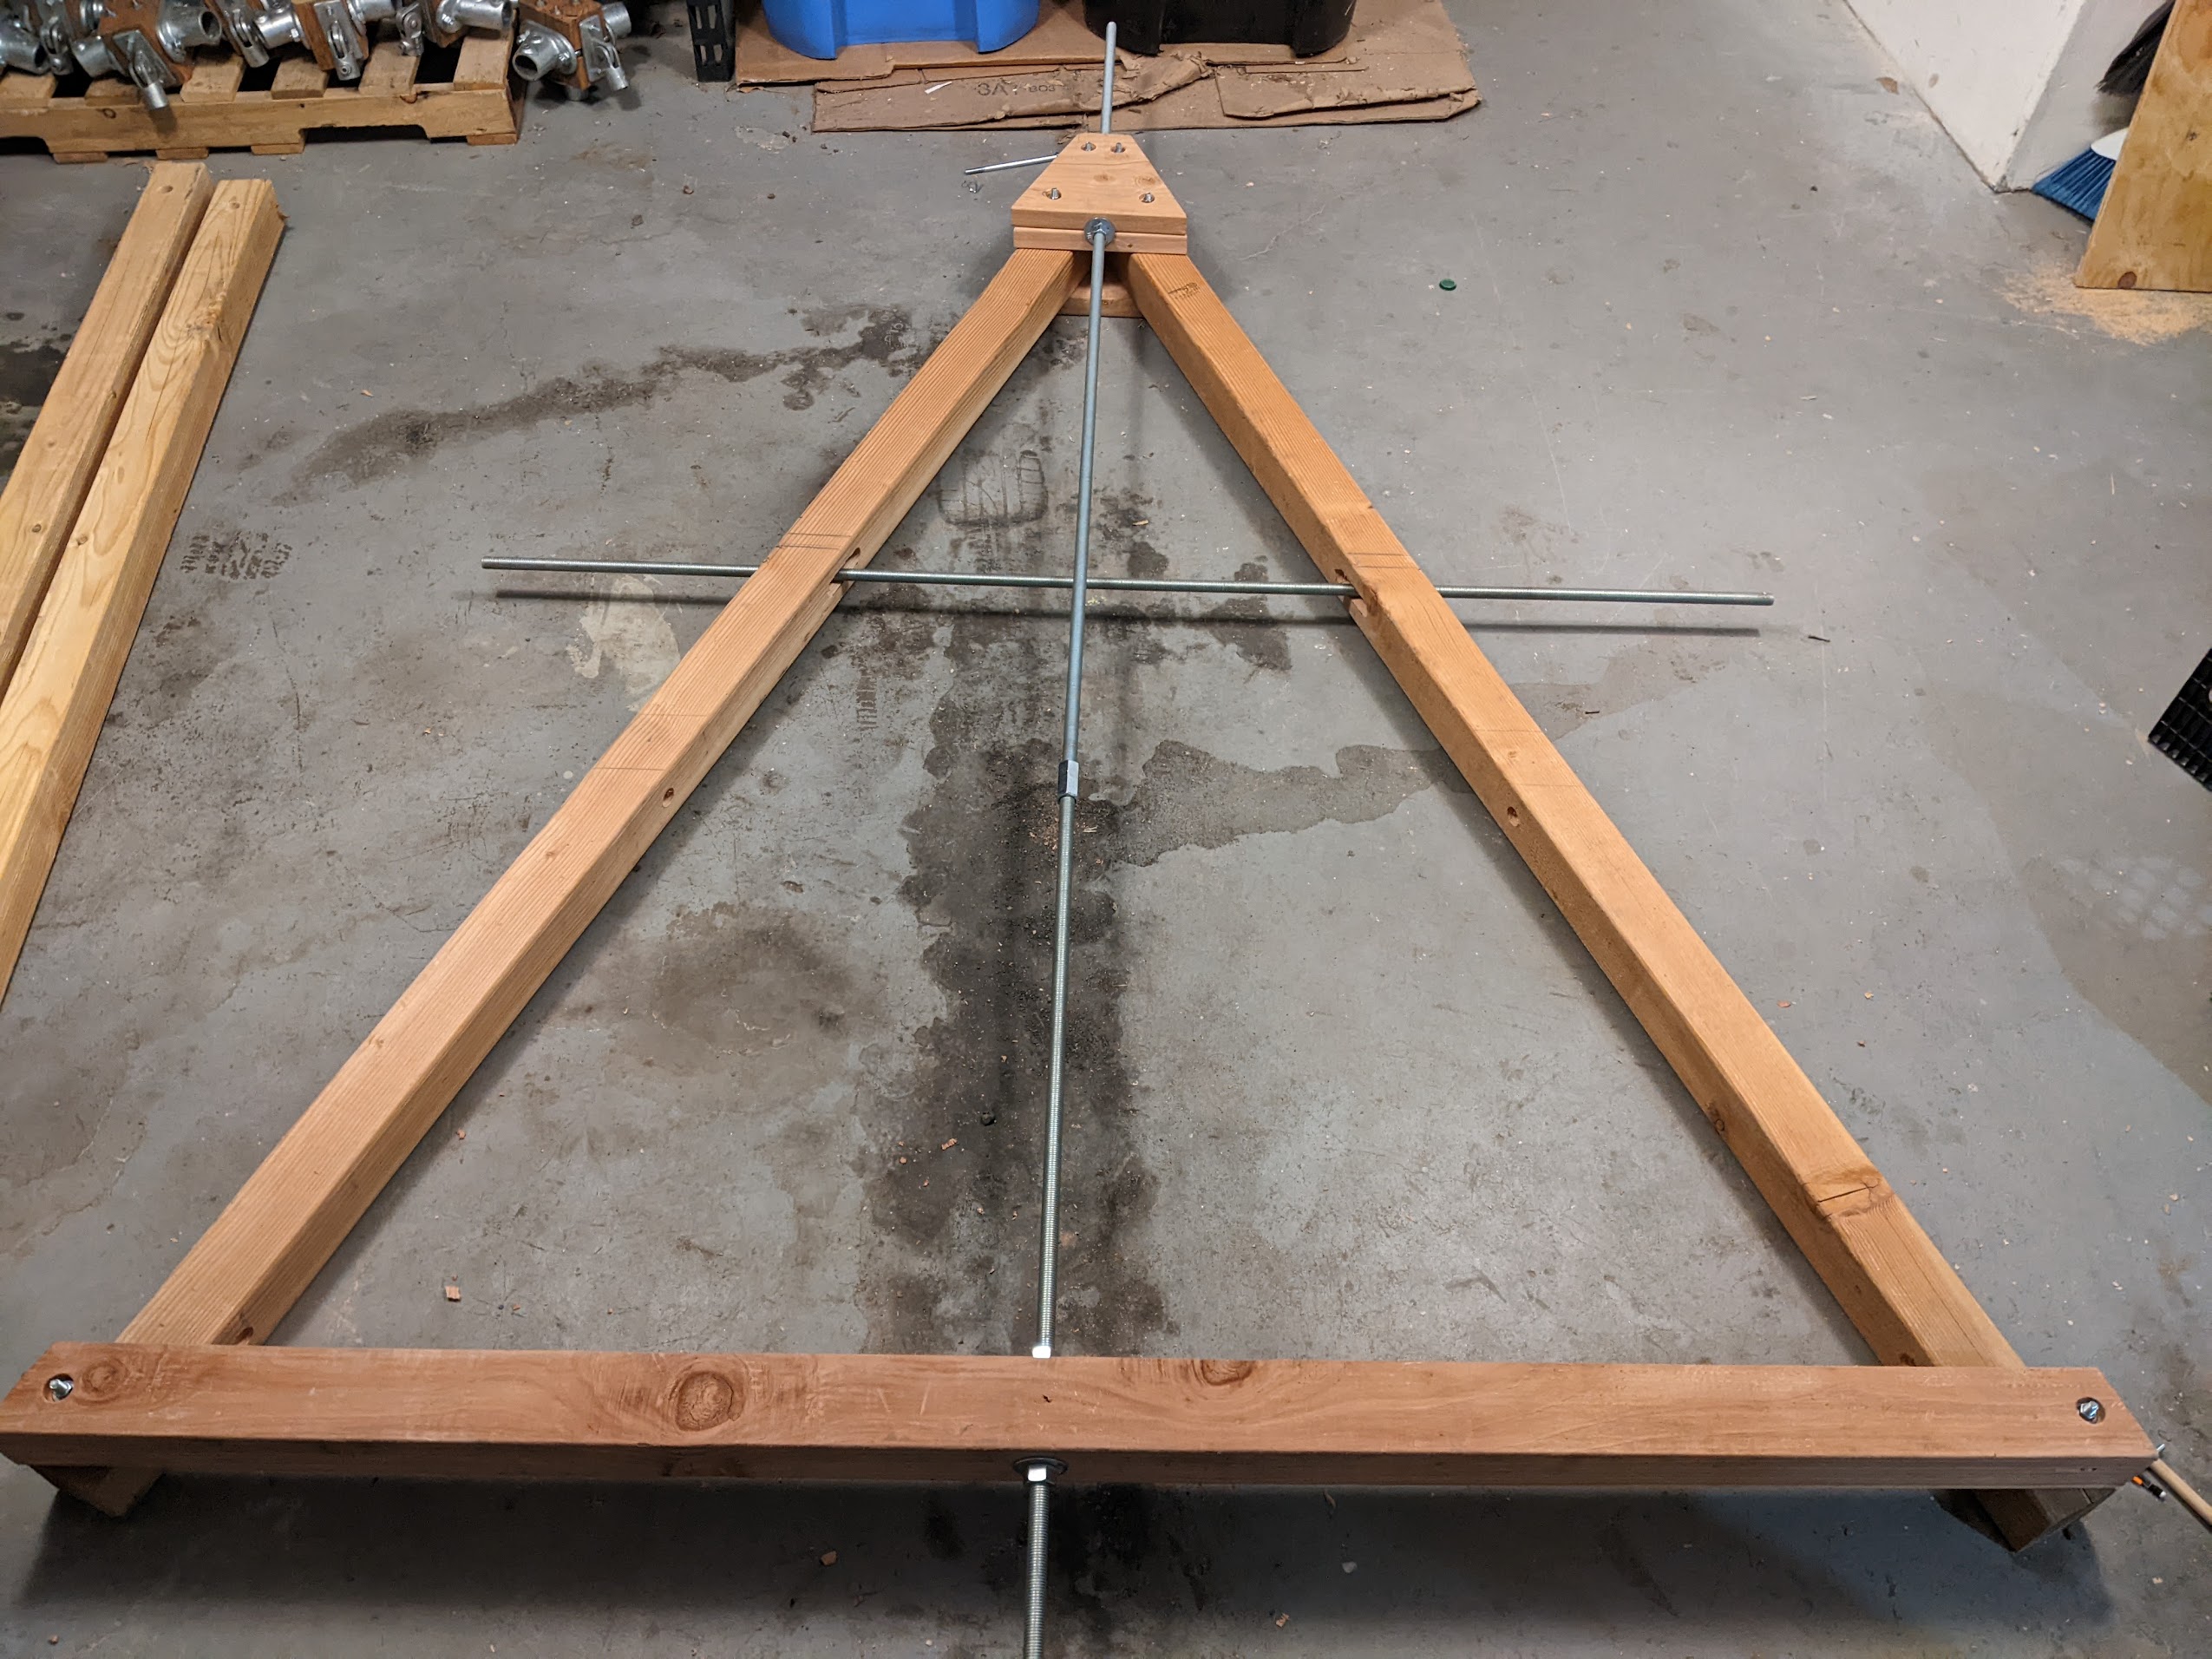 an A-frame on my garage floor. There's a metal cross held in its center made of threaded rod.